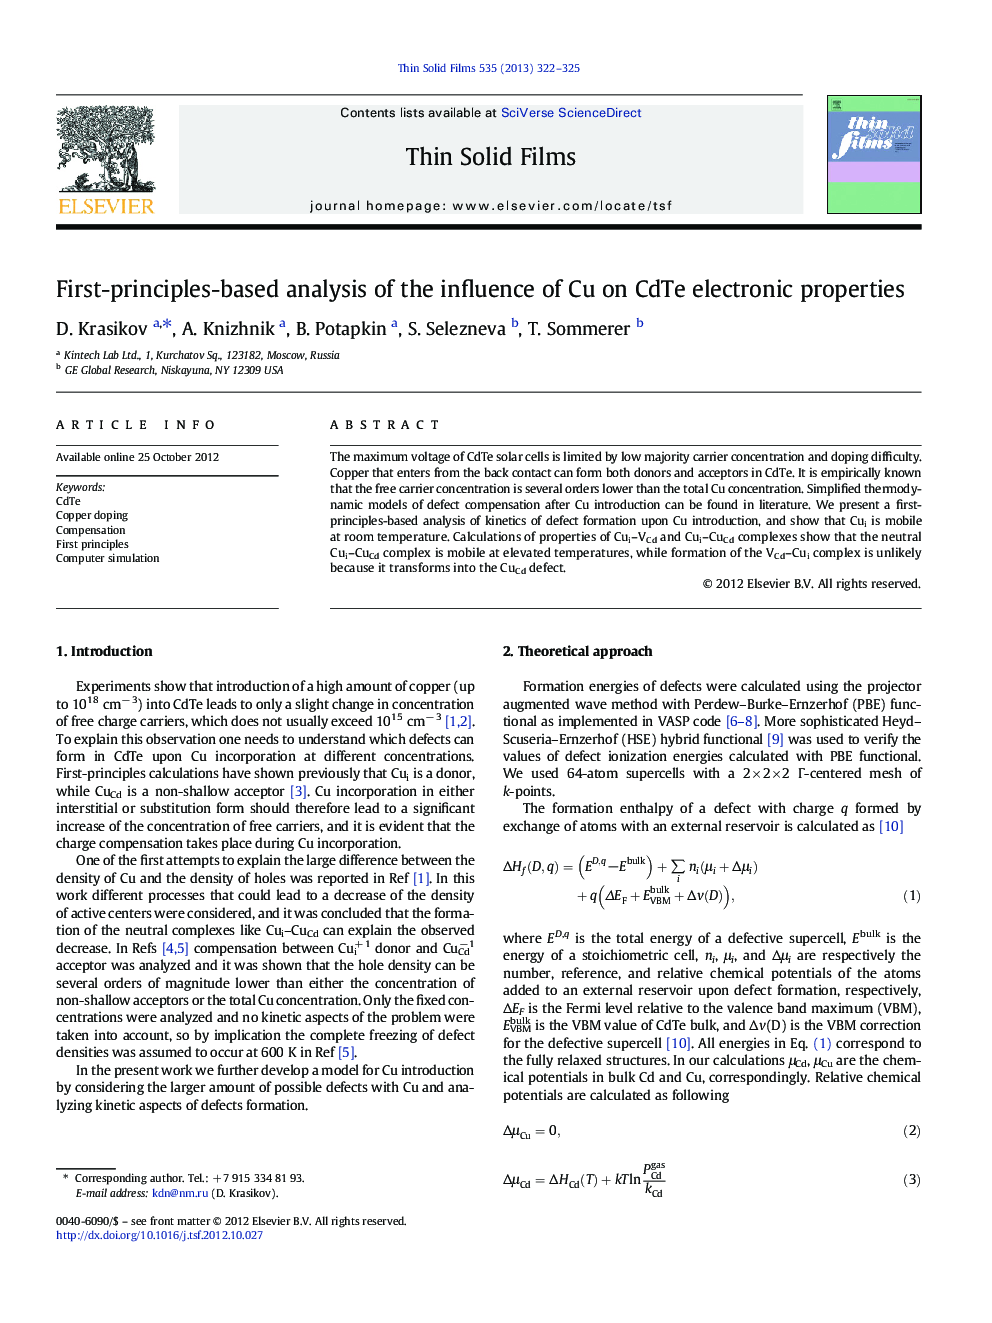 First-principles-based analysis of the influence of Cu on CdTe electronic properties